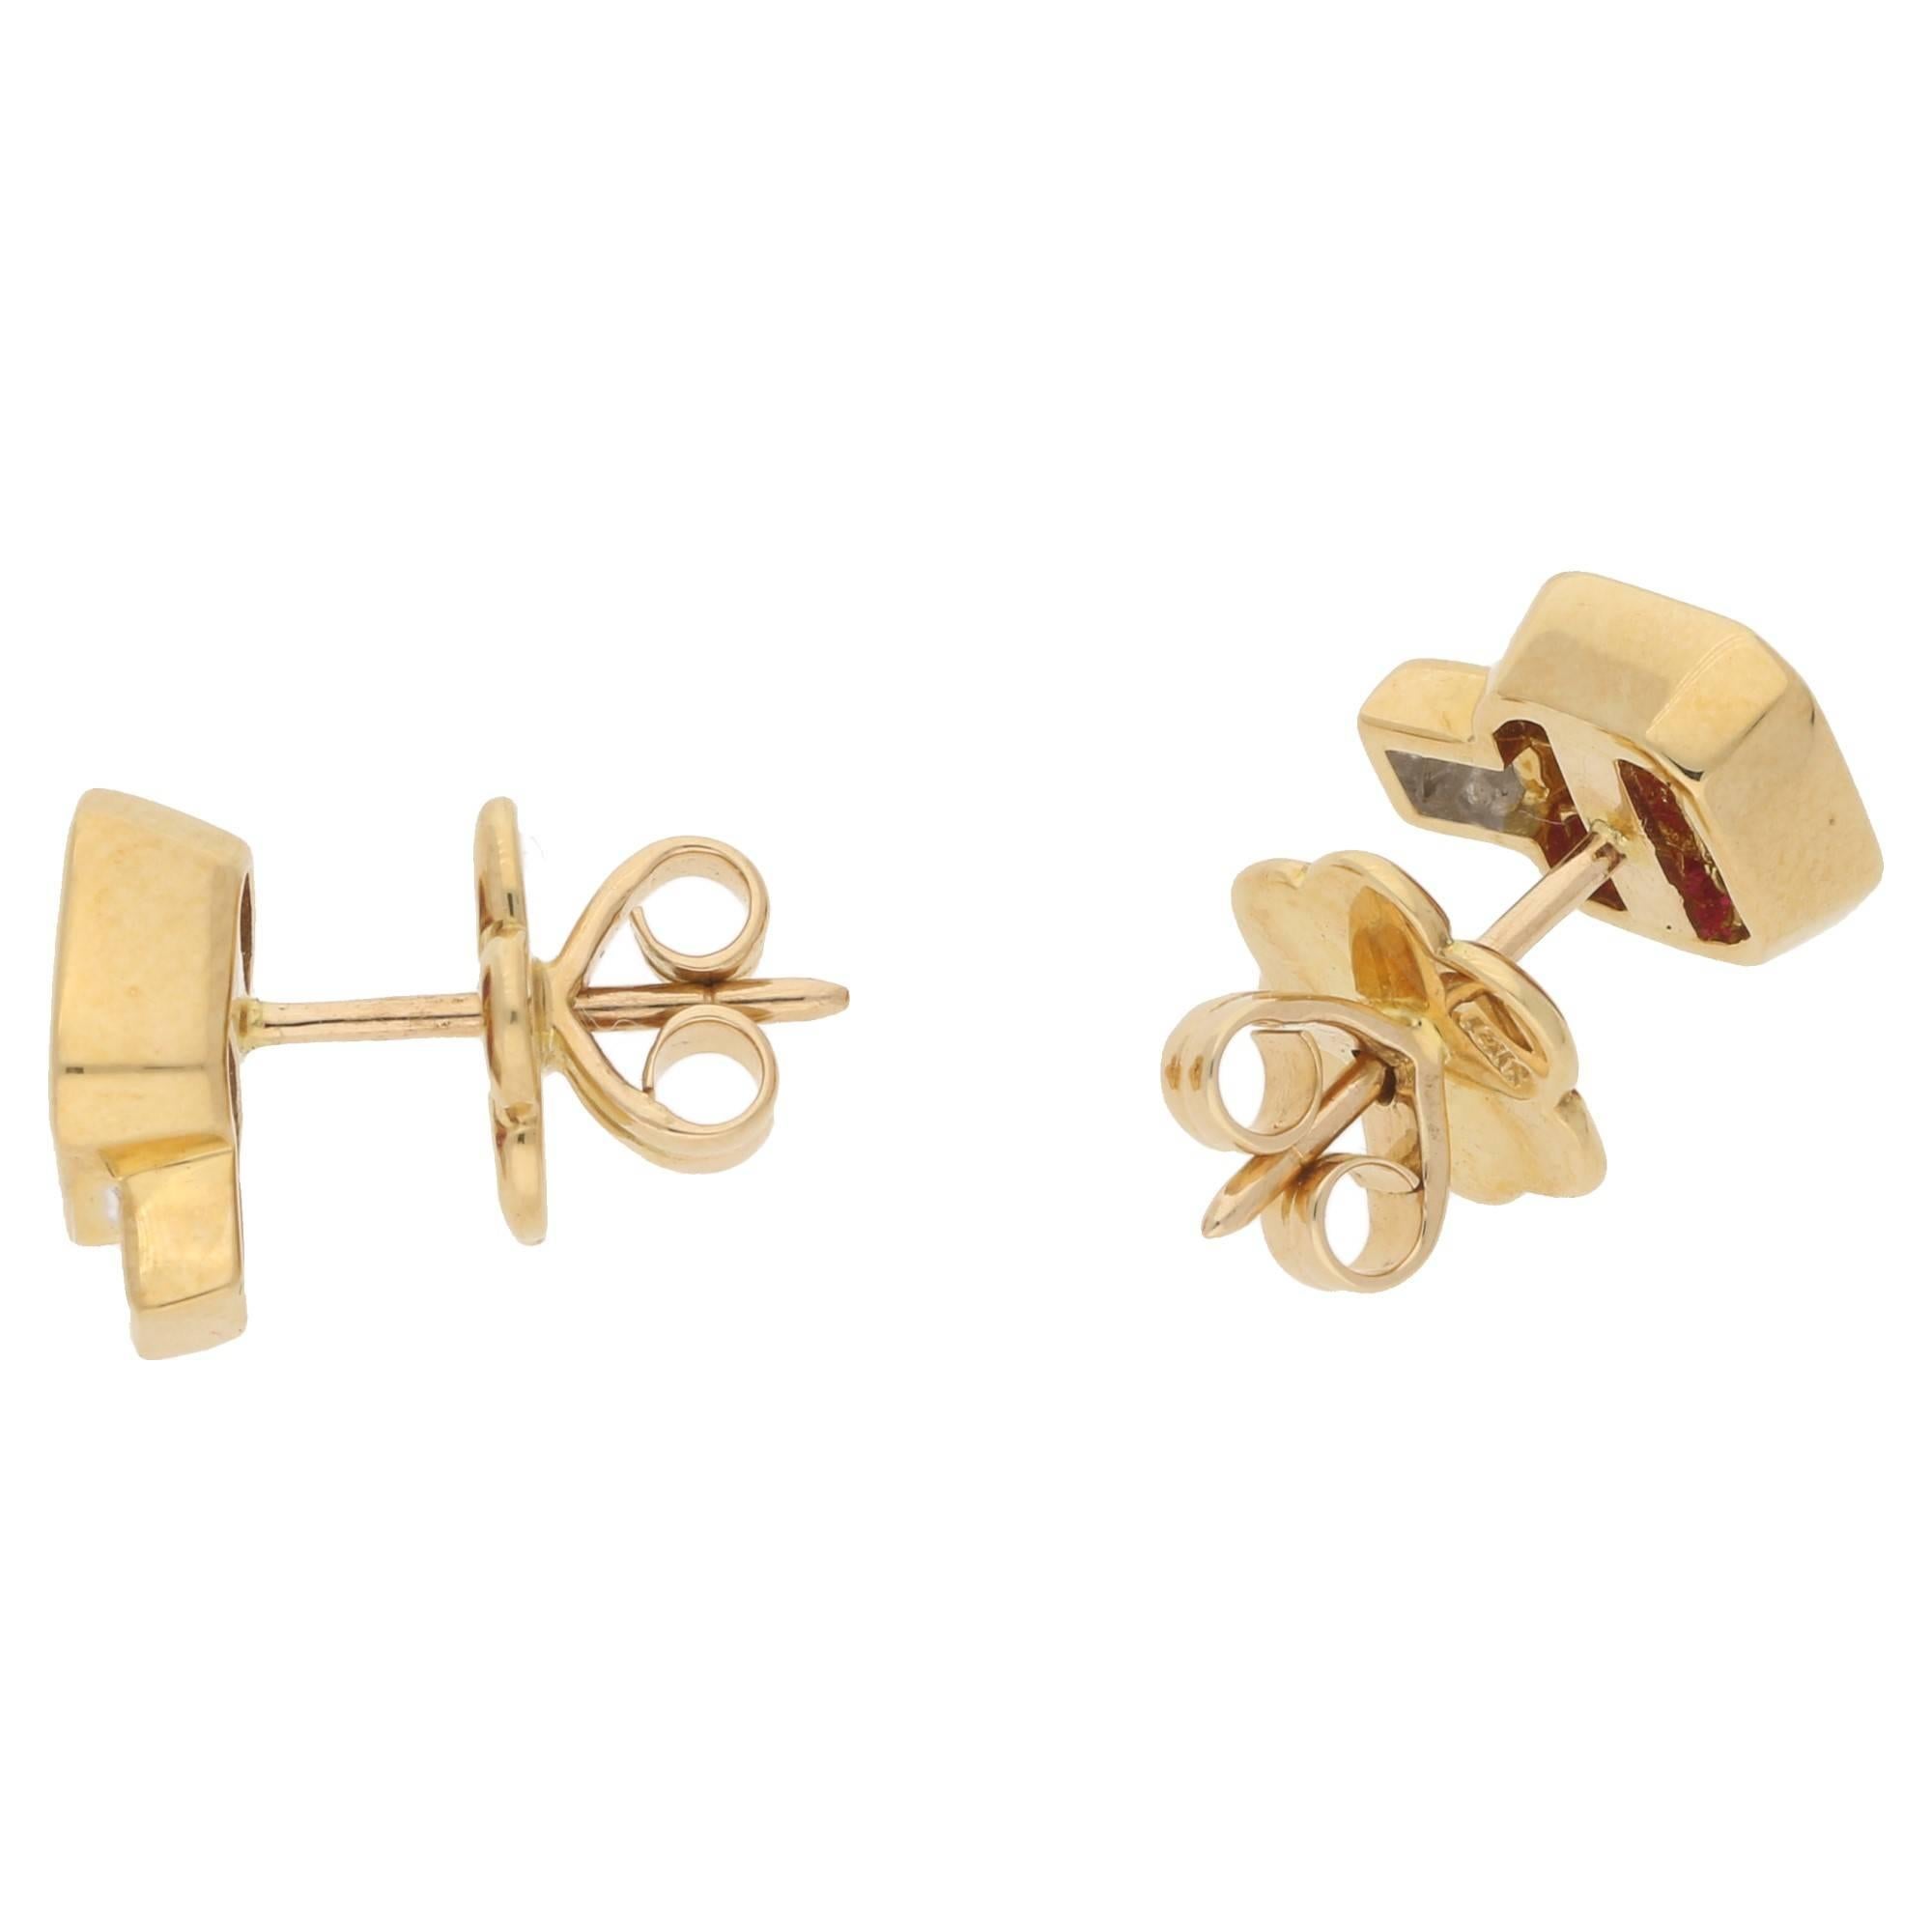 A chic pair of invisibly set ruby and diamond stud earrings in 18ct yellow gold. Consisting of nine French cut rubies in an 18ct yellow gold rub over setting stylishly topped with a princess cut diamond in an 18ct yellow gold collet setting. On post